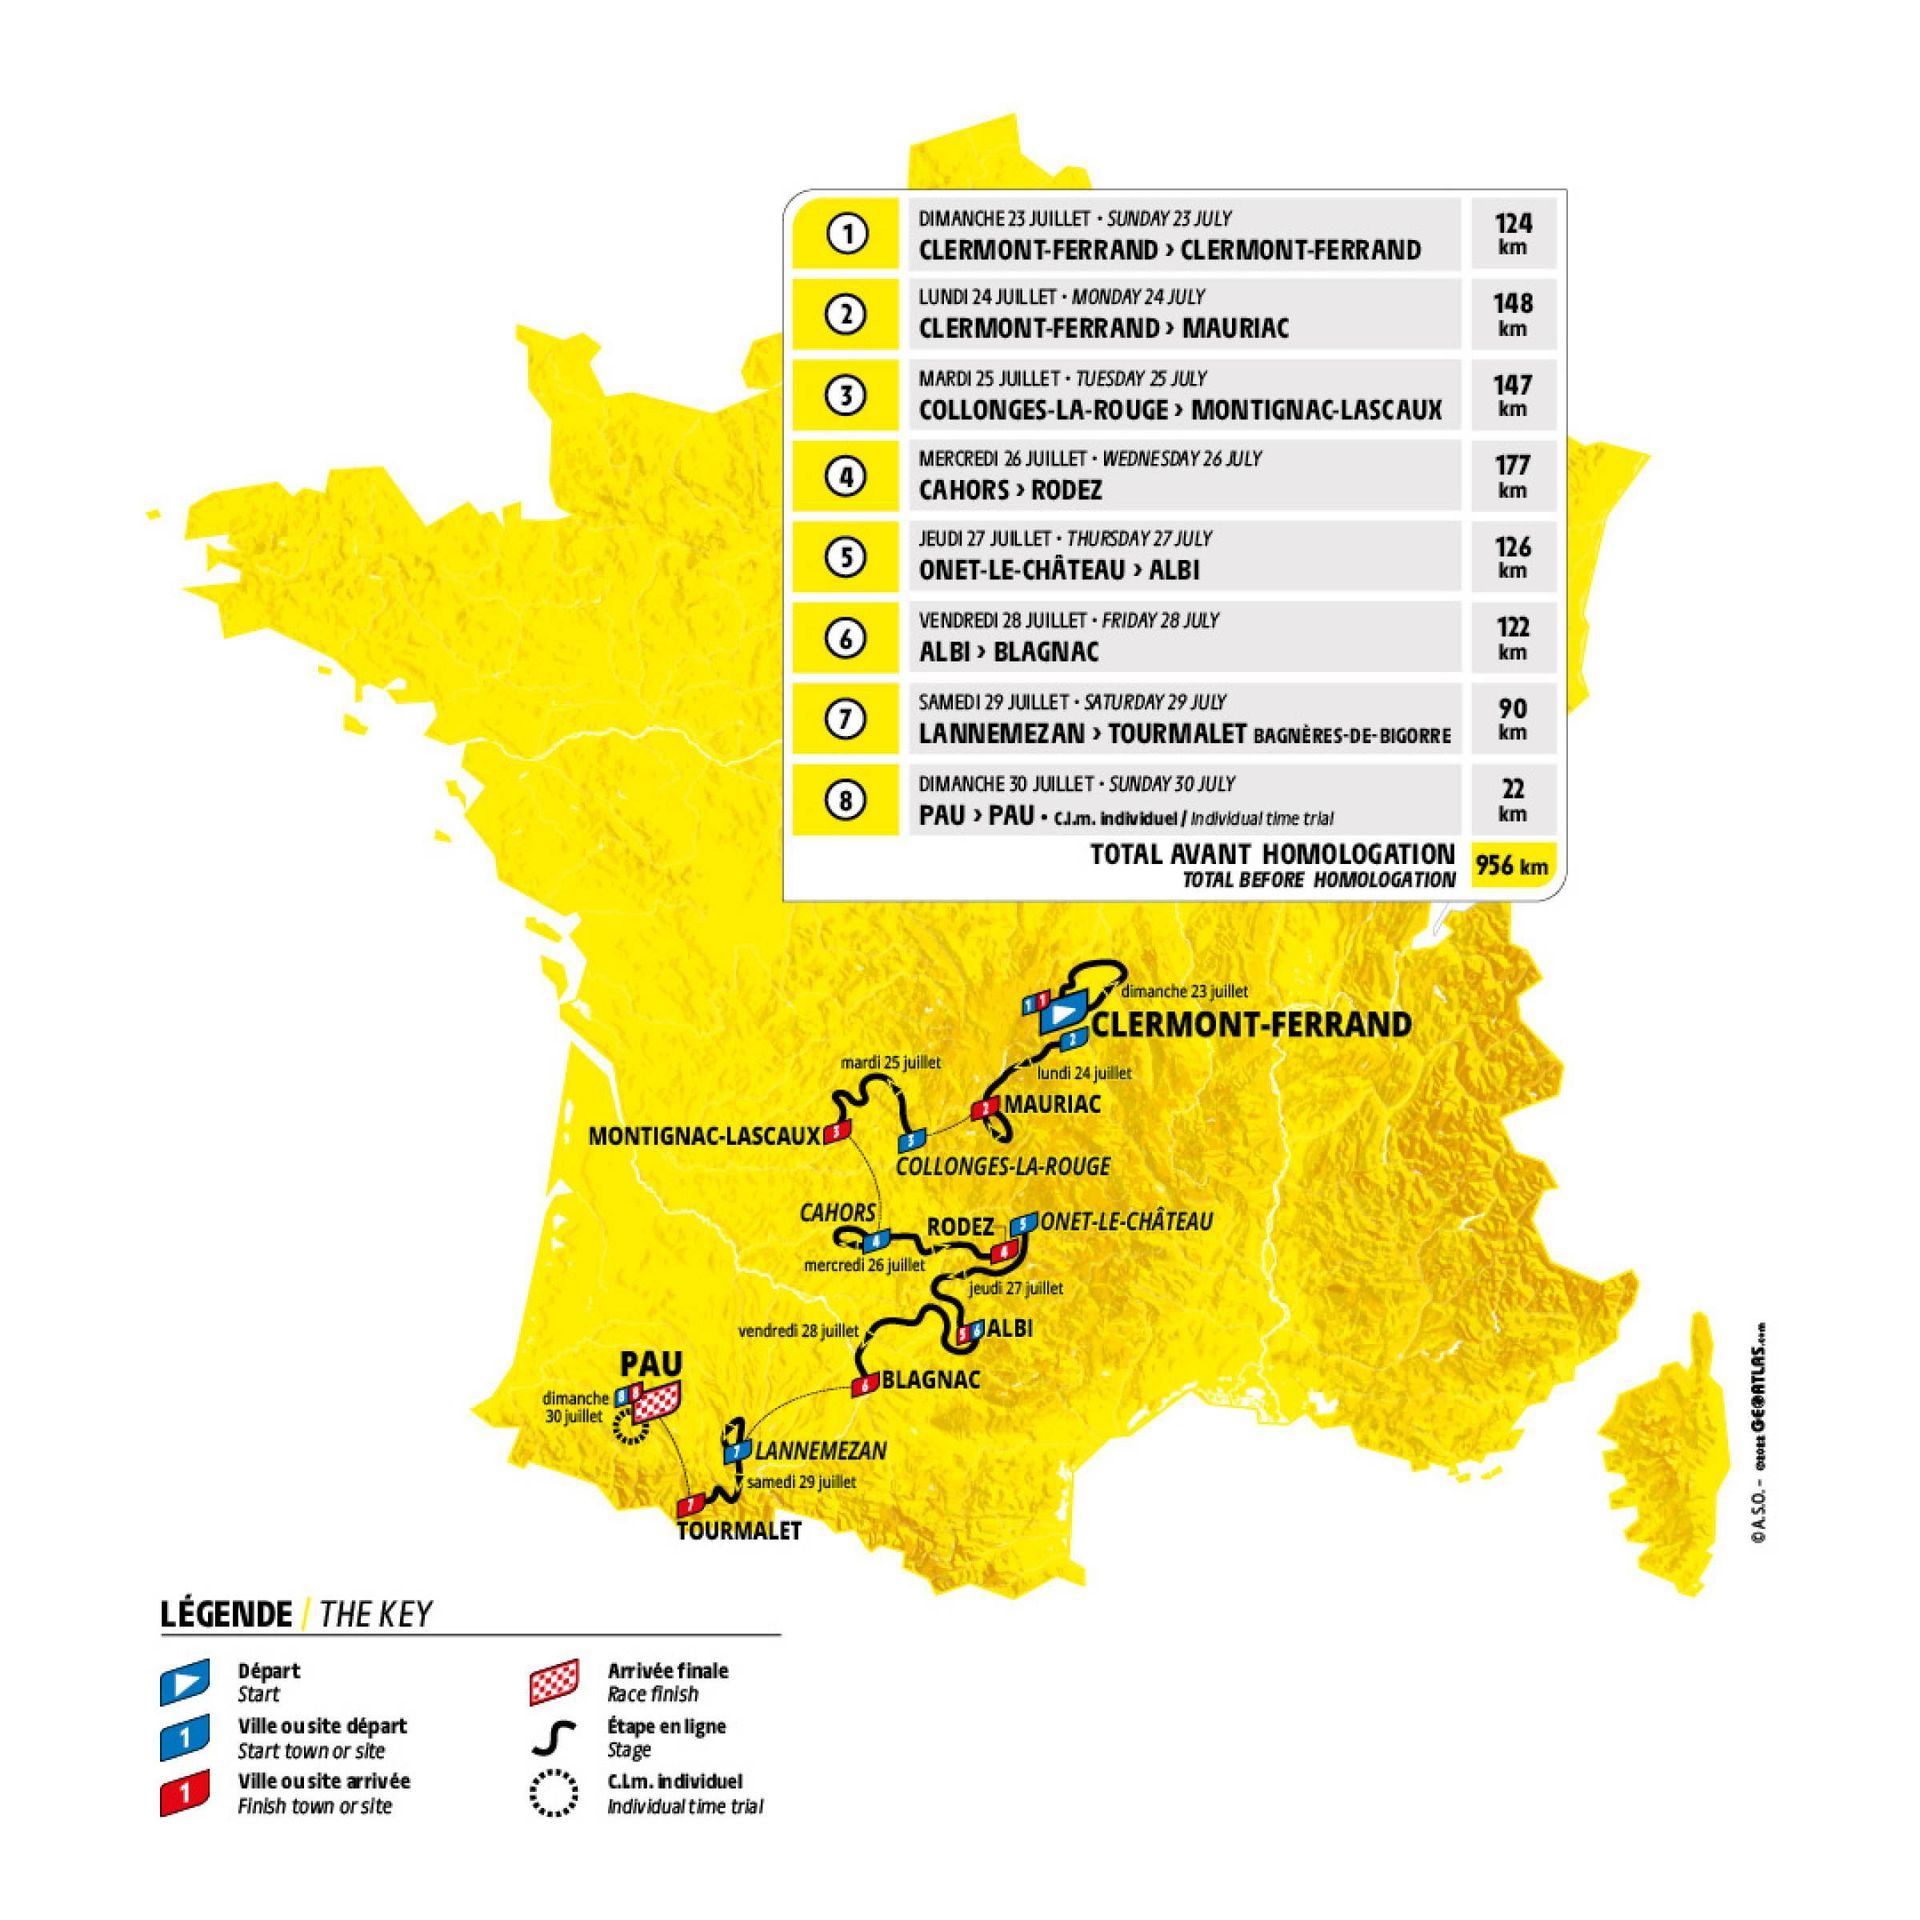 Tour de France Femmes 2023 route revealed Iconic Tourmalet summit and